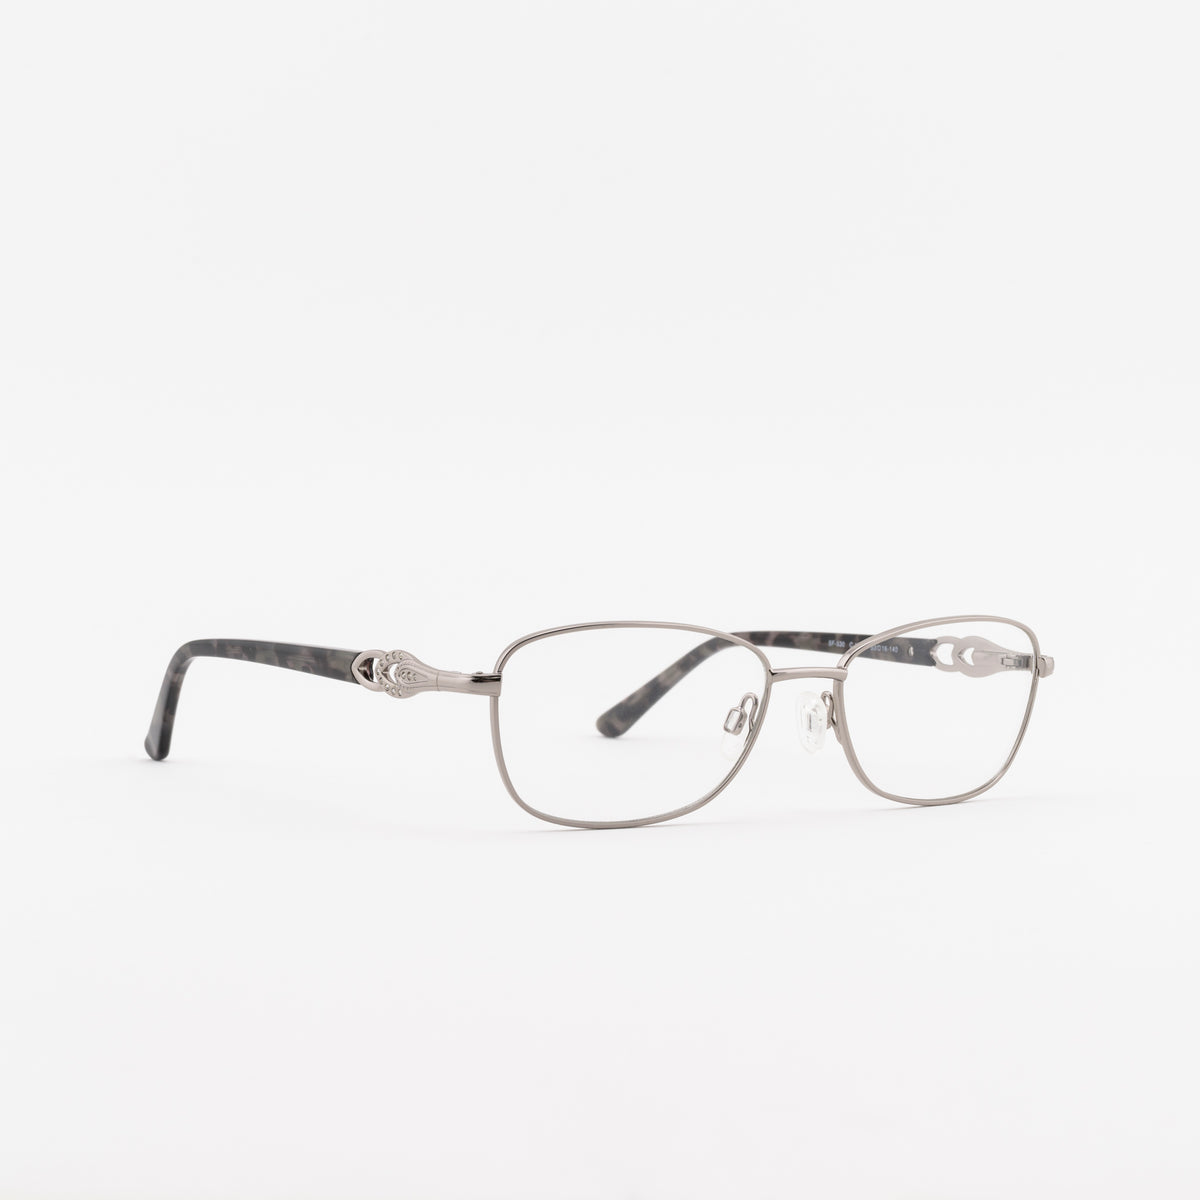 SF-530 Frames Superflex 53 C1 - SILVER BLACK Not Available